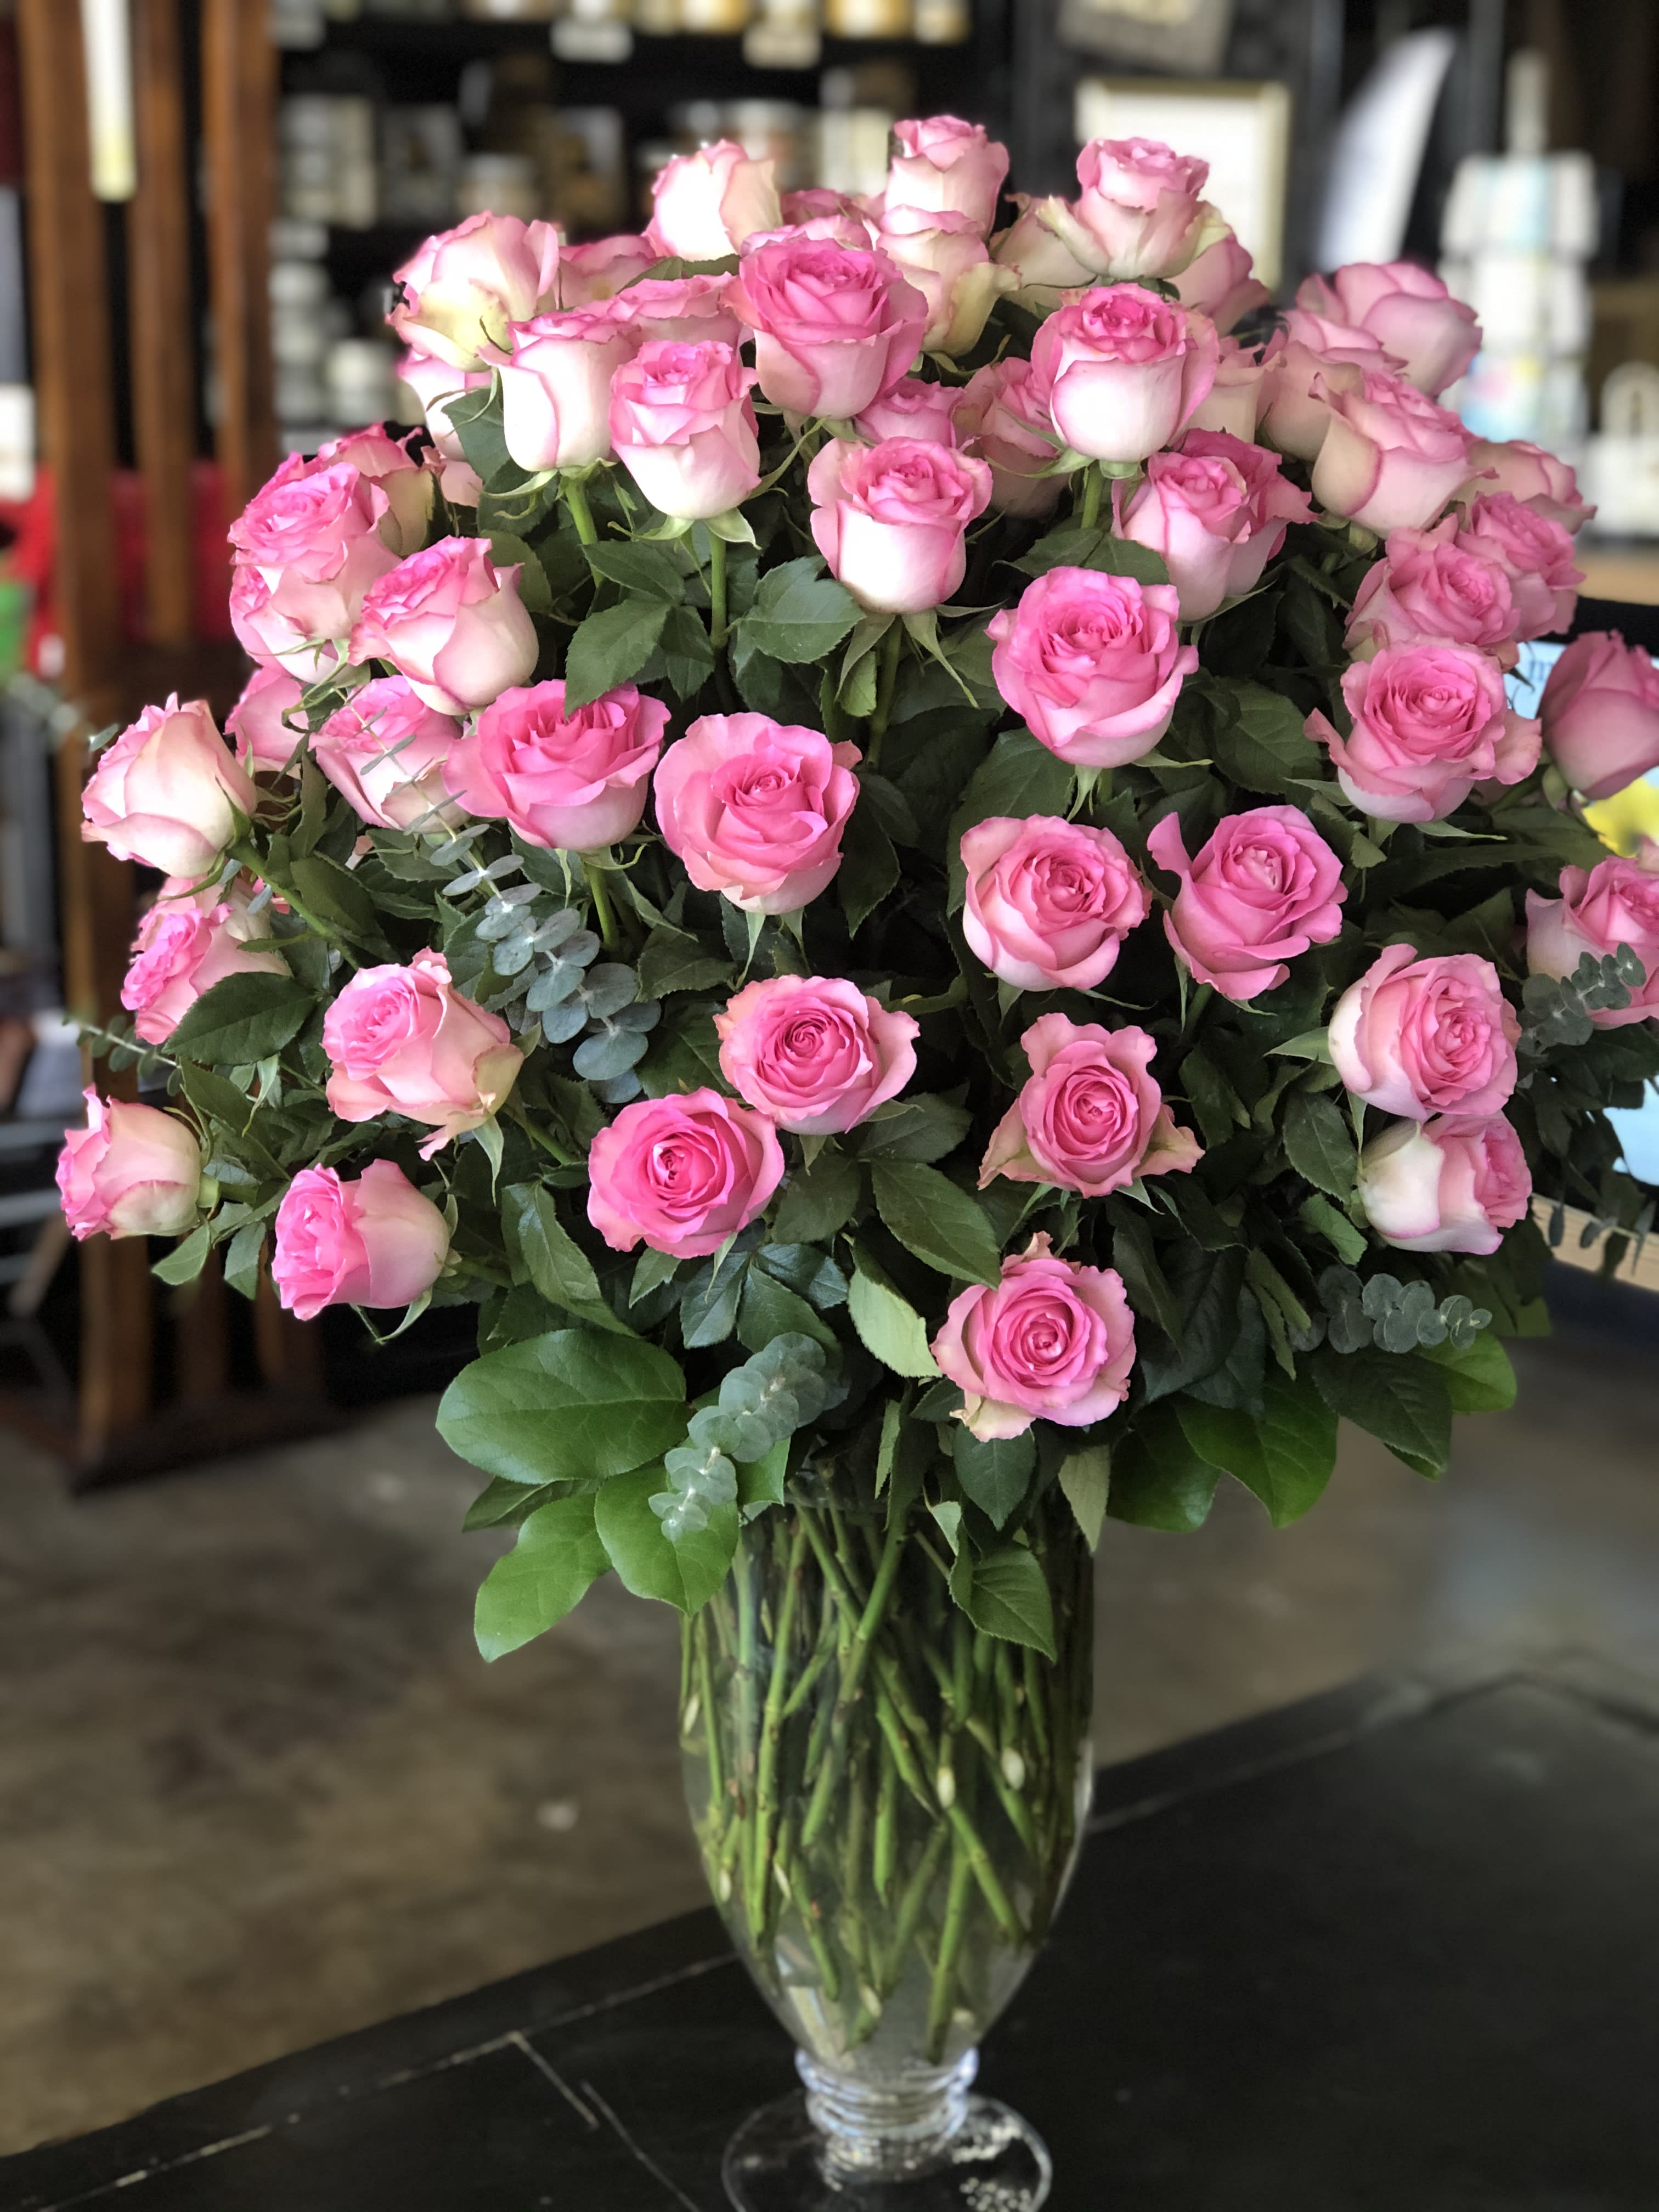 100 Pink Roses - 100 pink roses with mixed greenery in beautiful vase. Vase  depends on what we have in stock and if you want another color please specify in notes.   MUST BE ORDERED 24 HOURS IN ADVANCE OF DELIVERY DATE TO ENSURE WE CAN GET FLOWERS.